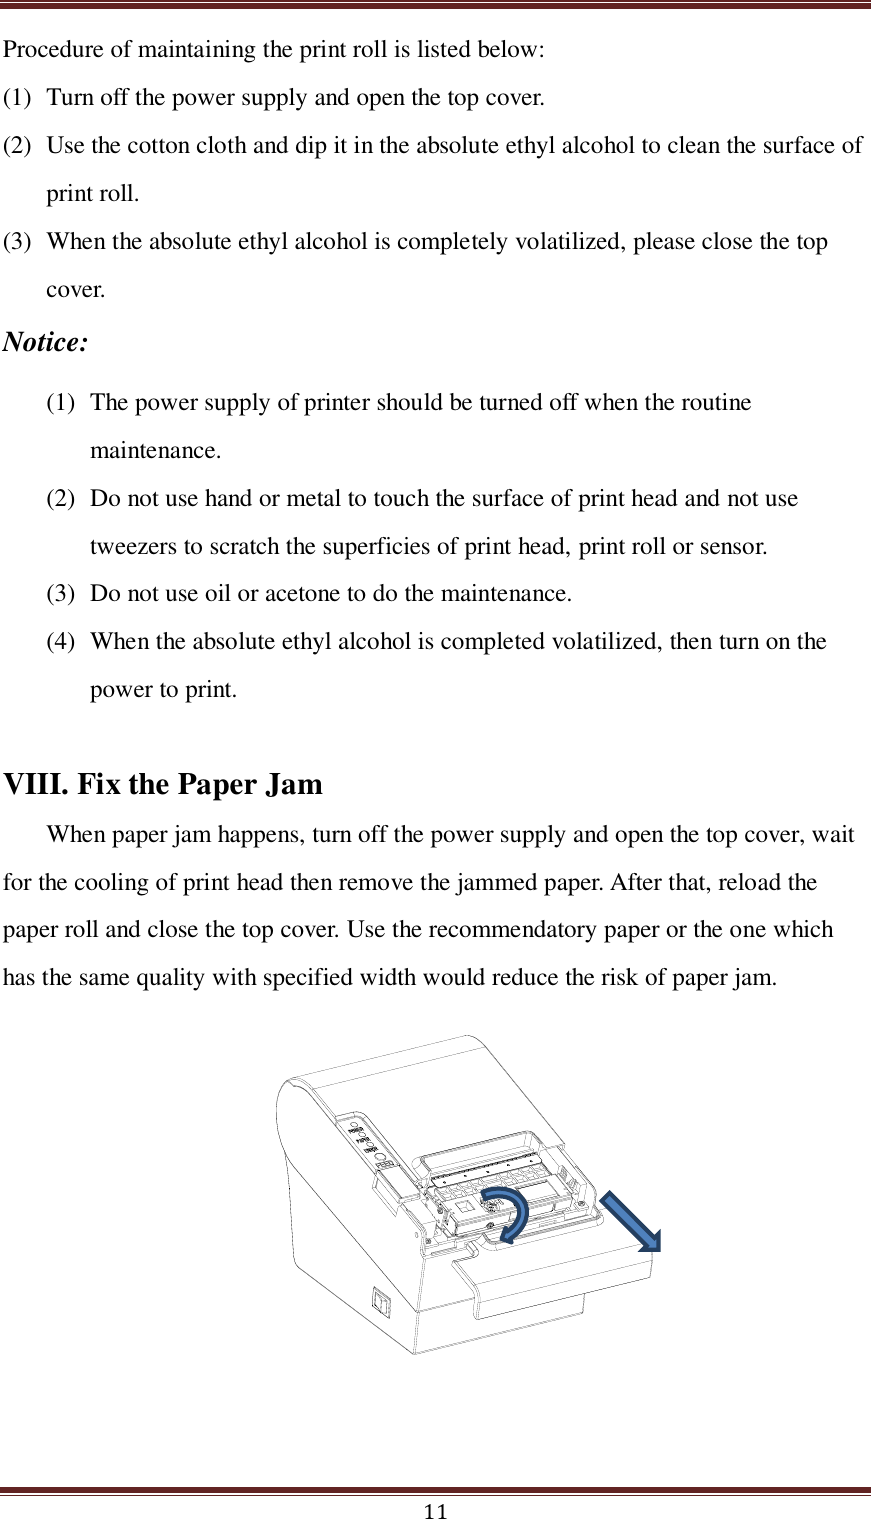  11 Procedure of maintaining the print roll is listed below:   (1) Turn off the power supply and open the top cover.   (2) Use the cotton cloth and dip it in the absolute ethyl alcohol to clean the surface of print roll. (3) When the absolute ethyl alcohol is completely volatilized, please close the top cover.   Notice: (1) The power supply of printer should be turned off when the routine maintenance. (2) Do not use hand or metal to touch the surface of print head and not use tweezers to scratch the superficies of print head, print roll or sensor. (3) Do not use oil or acetone to do the maintenance. (4) When the absolute ethyl alcohol is completed volatilized, then turn on the power to print.    VIII. Fix the Paper Jam When paper jam happens, turn off the power supply and open the top cover, wait for the cooling of print head then remove the jammed paper. After that, reload the paper roll and close the top cover. Use the recommendatory paper or the one which has the same quality with specified width would reduce the risk of paper jam.  